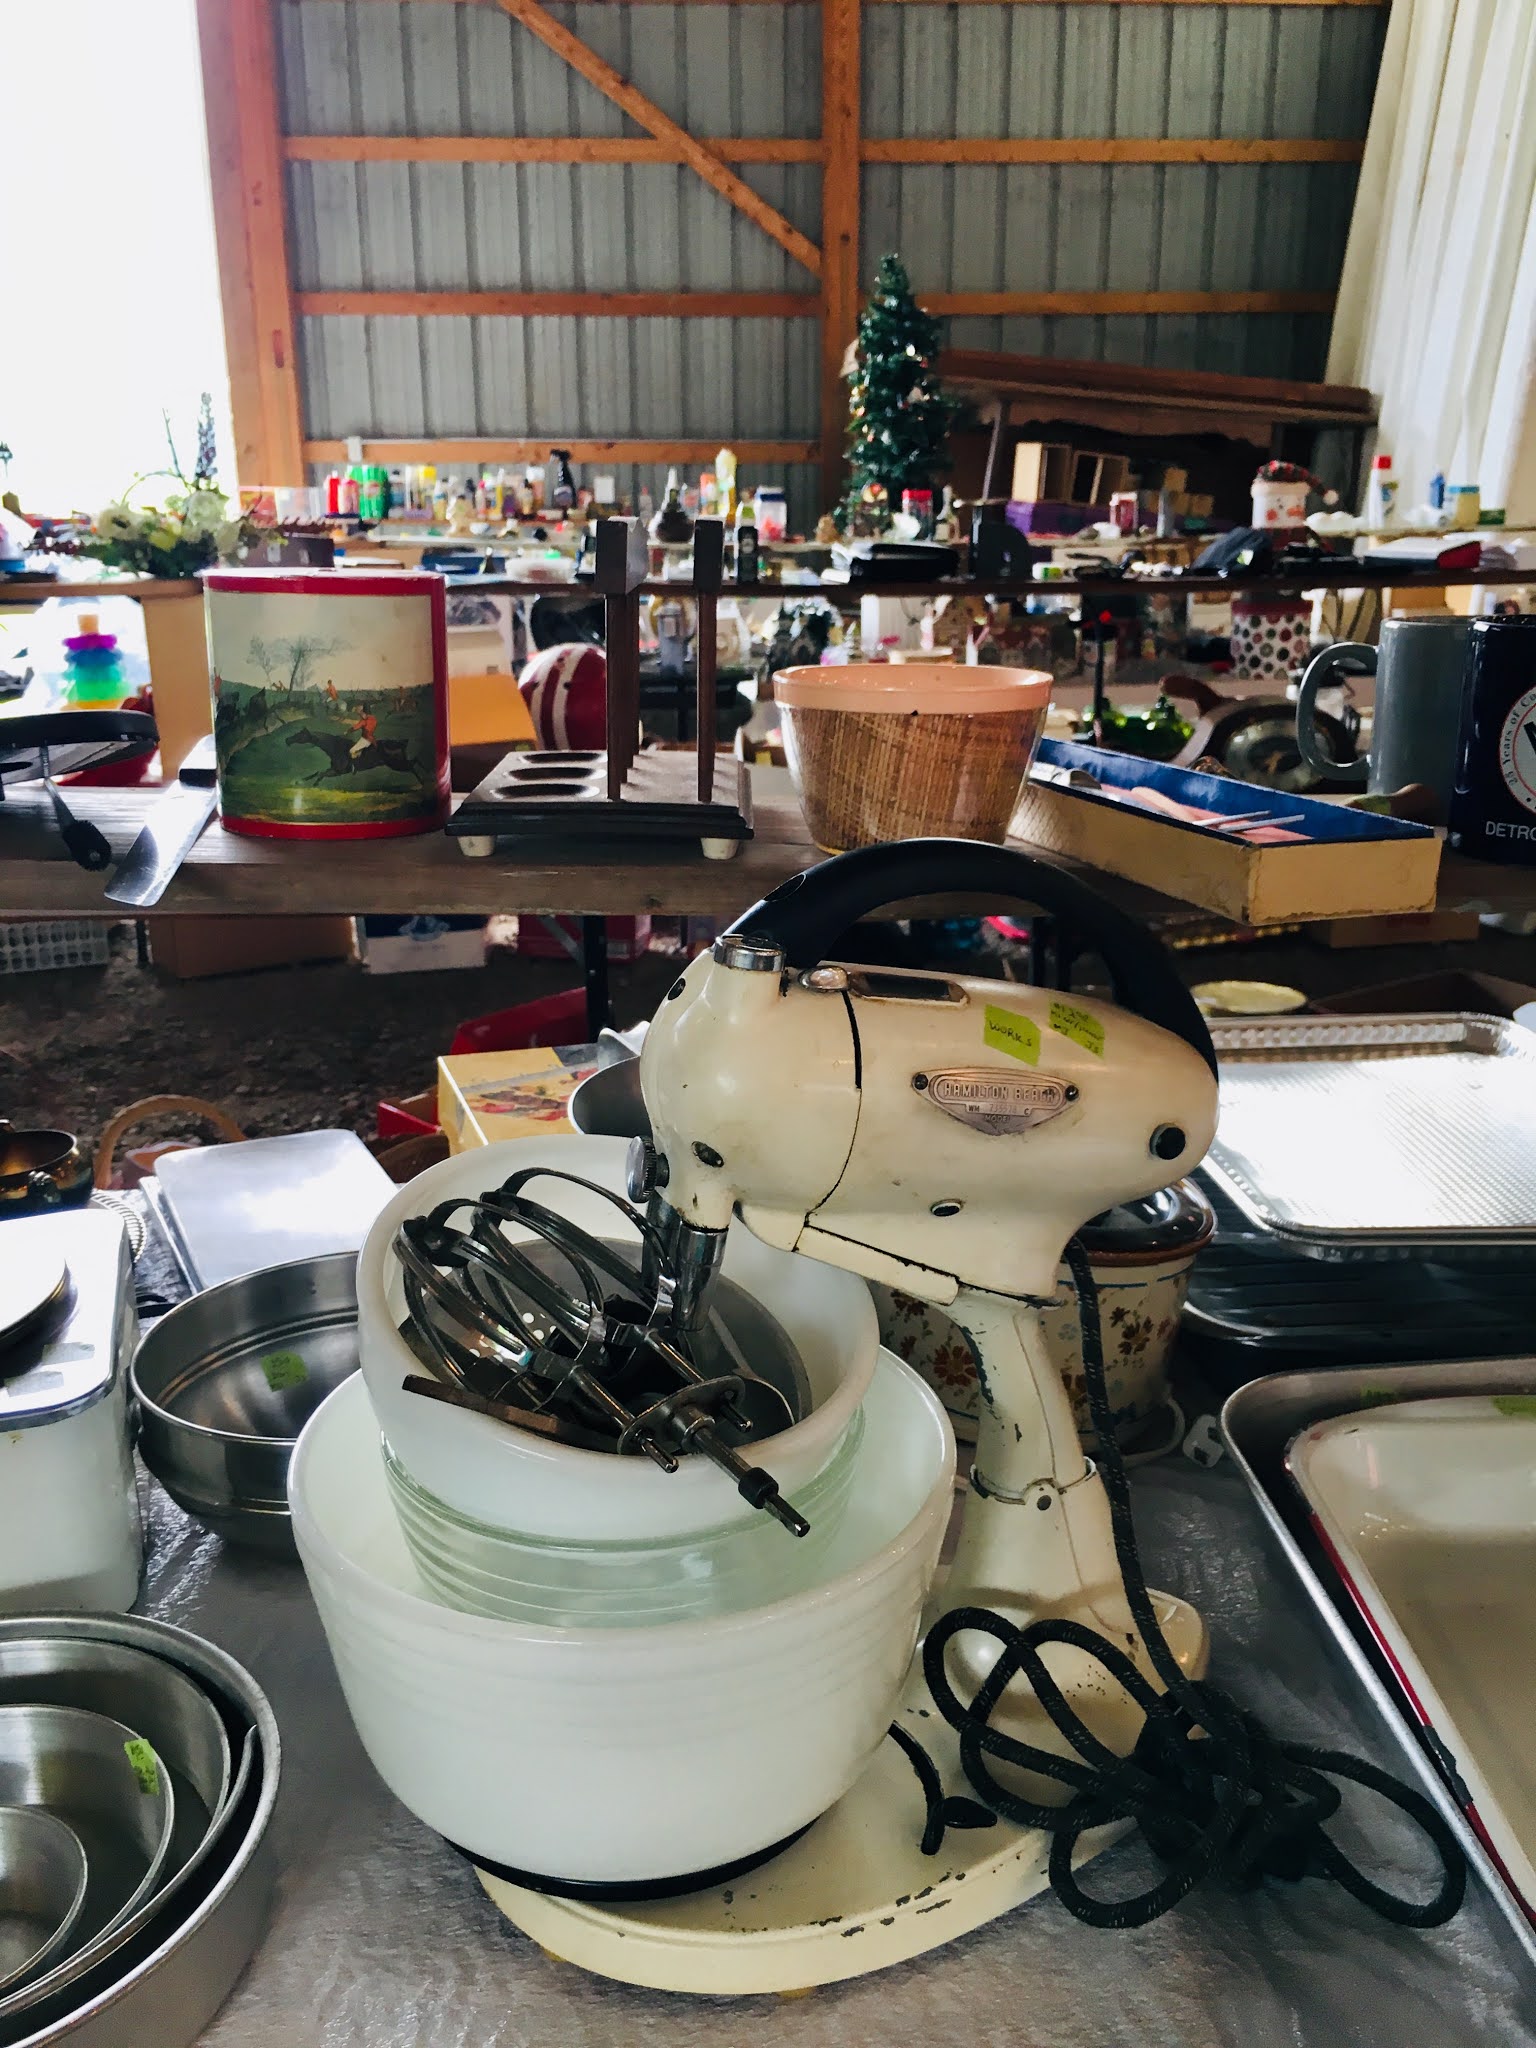 Vintage mixers and cooking equipment at Midwestern Barn Sale